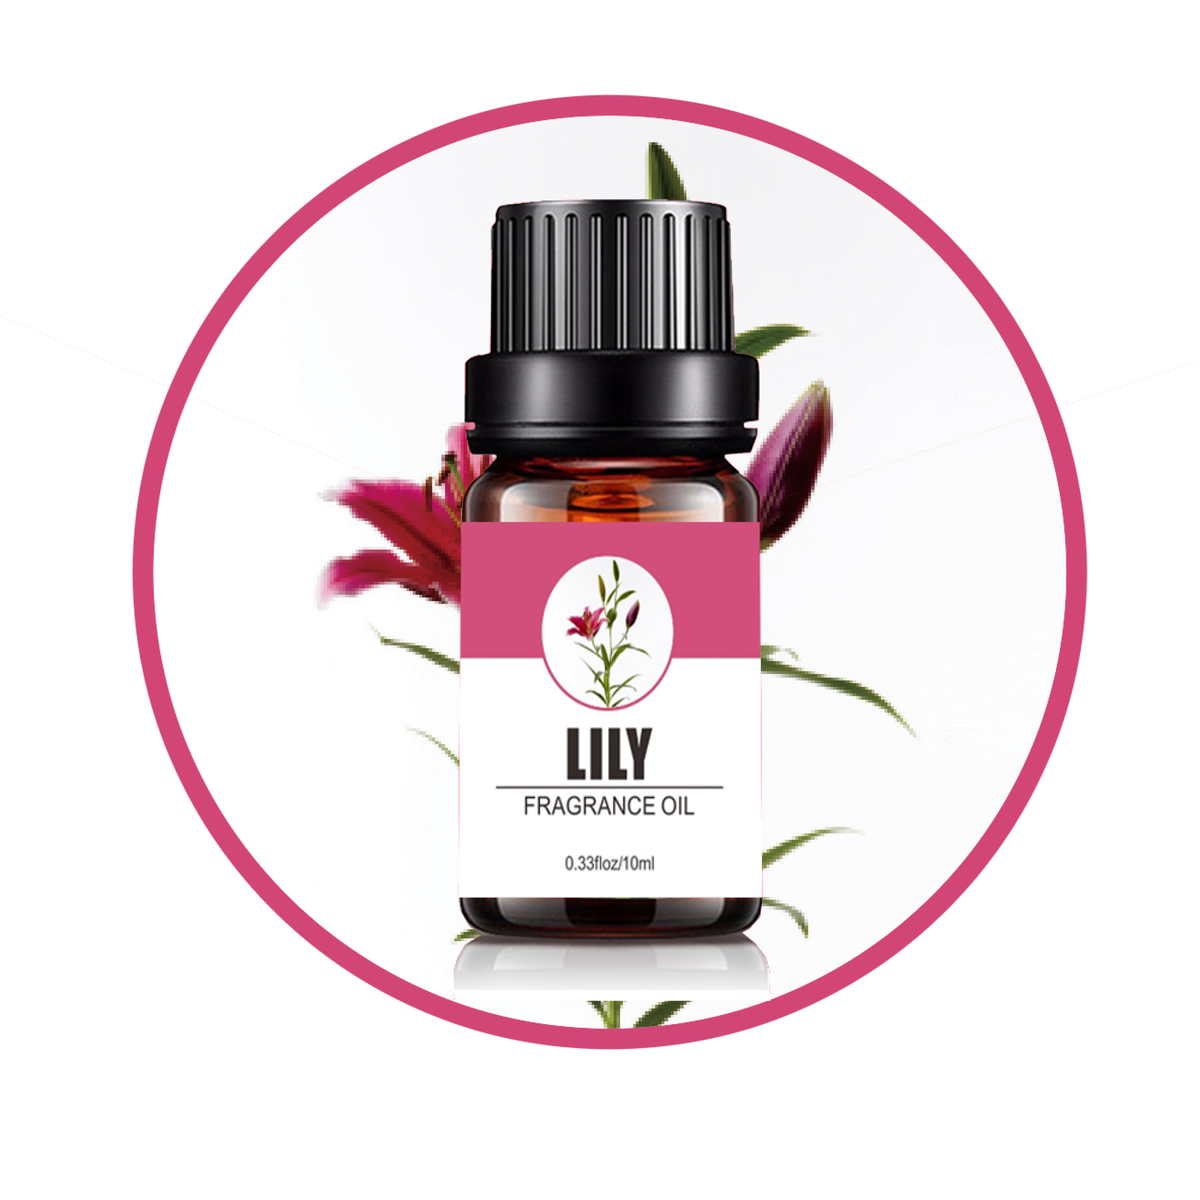 Lily - 10ml Fragrance Oil